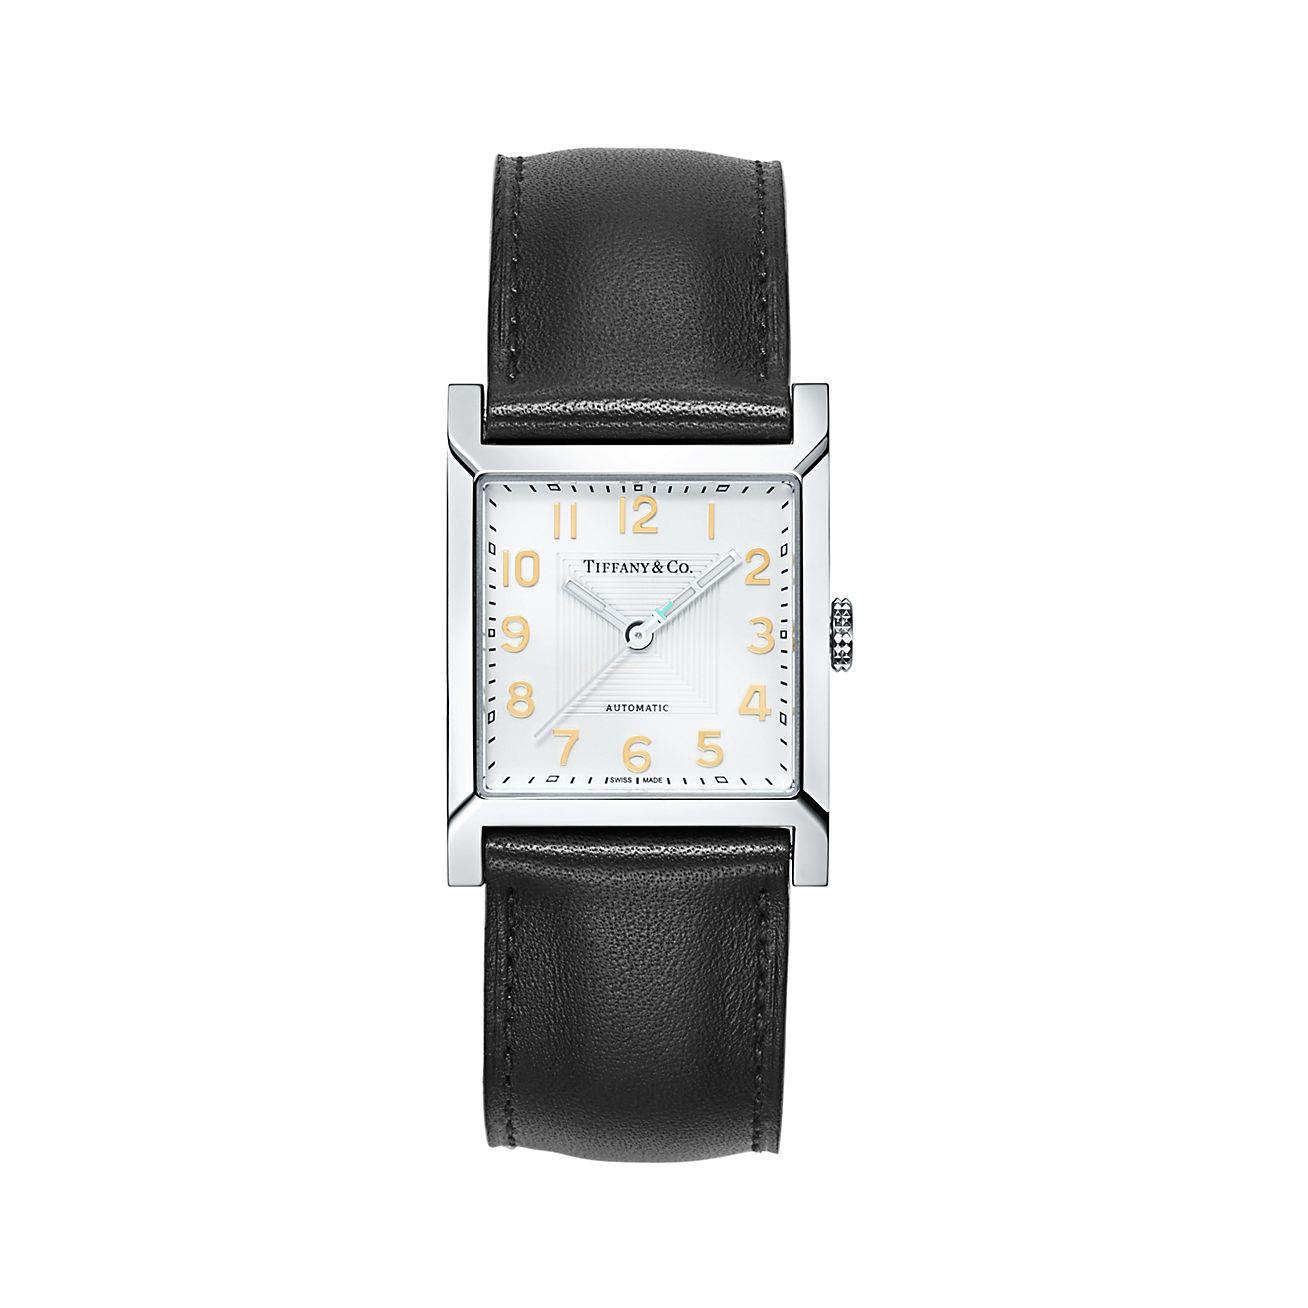 Tiffany 1837 Makers 27 mm square watch in stainless steel with a